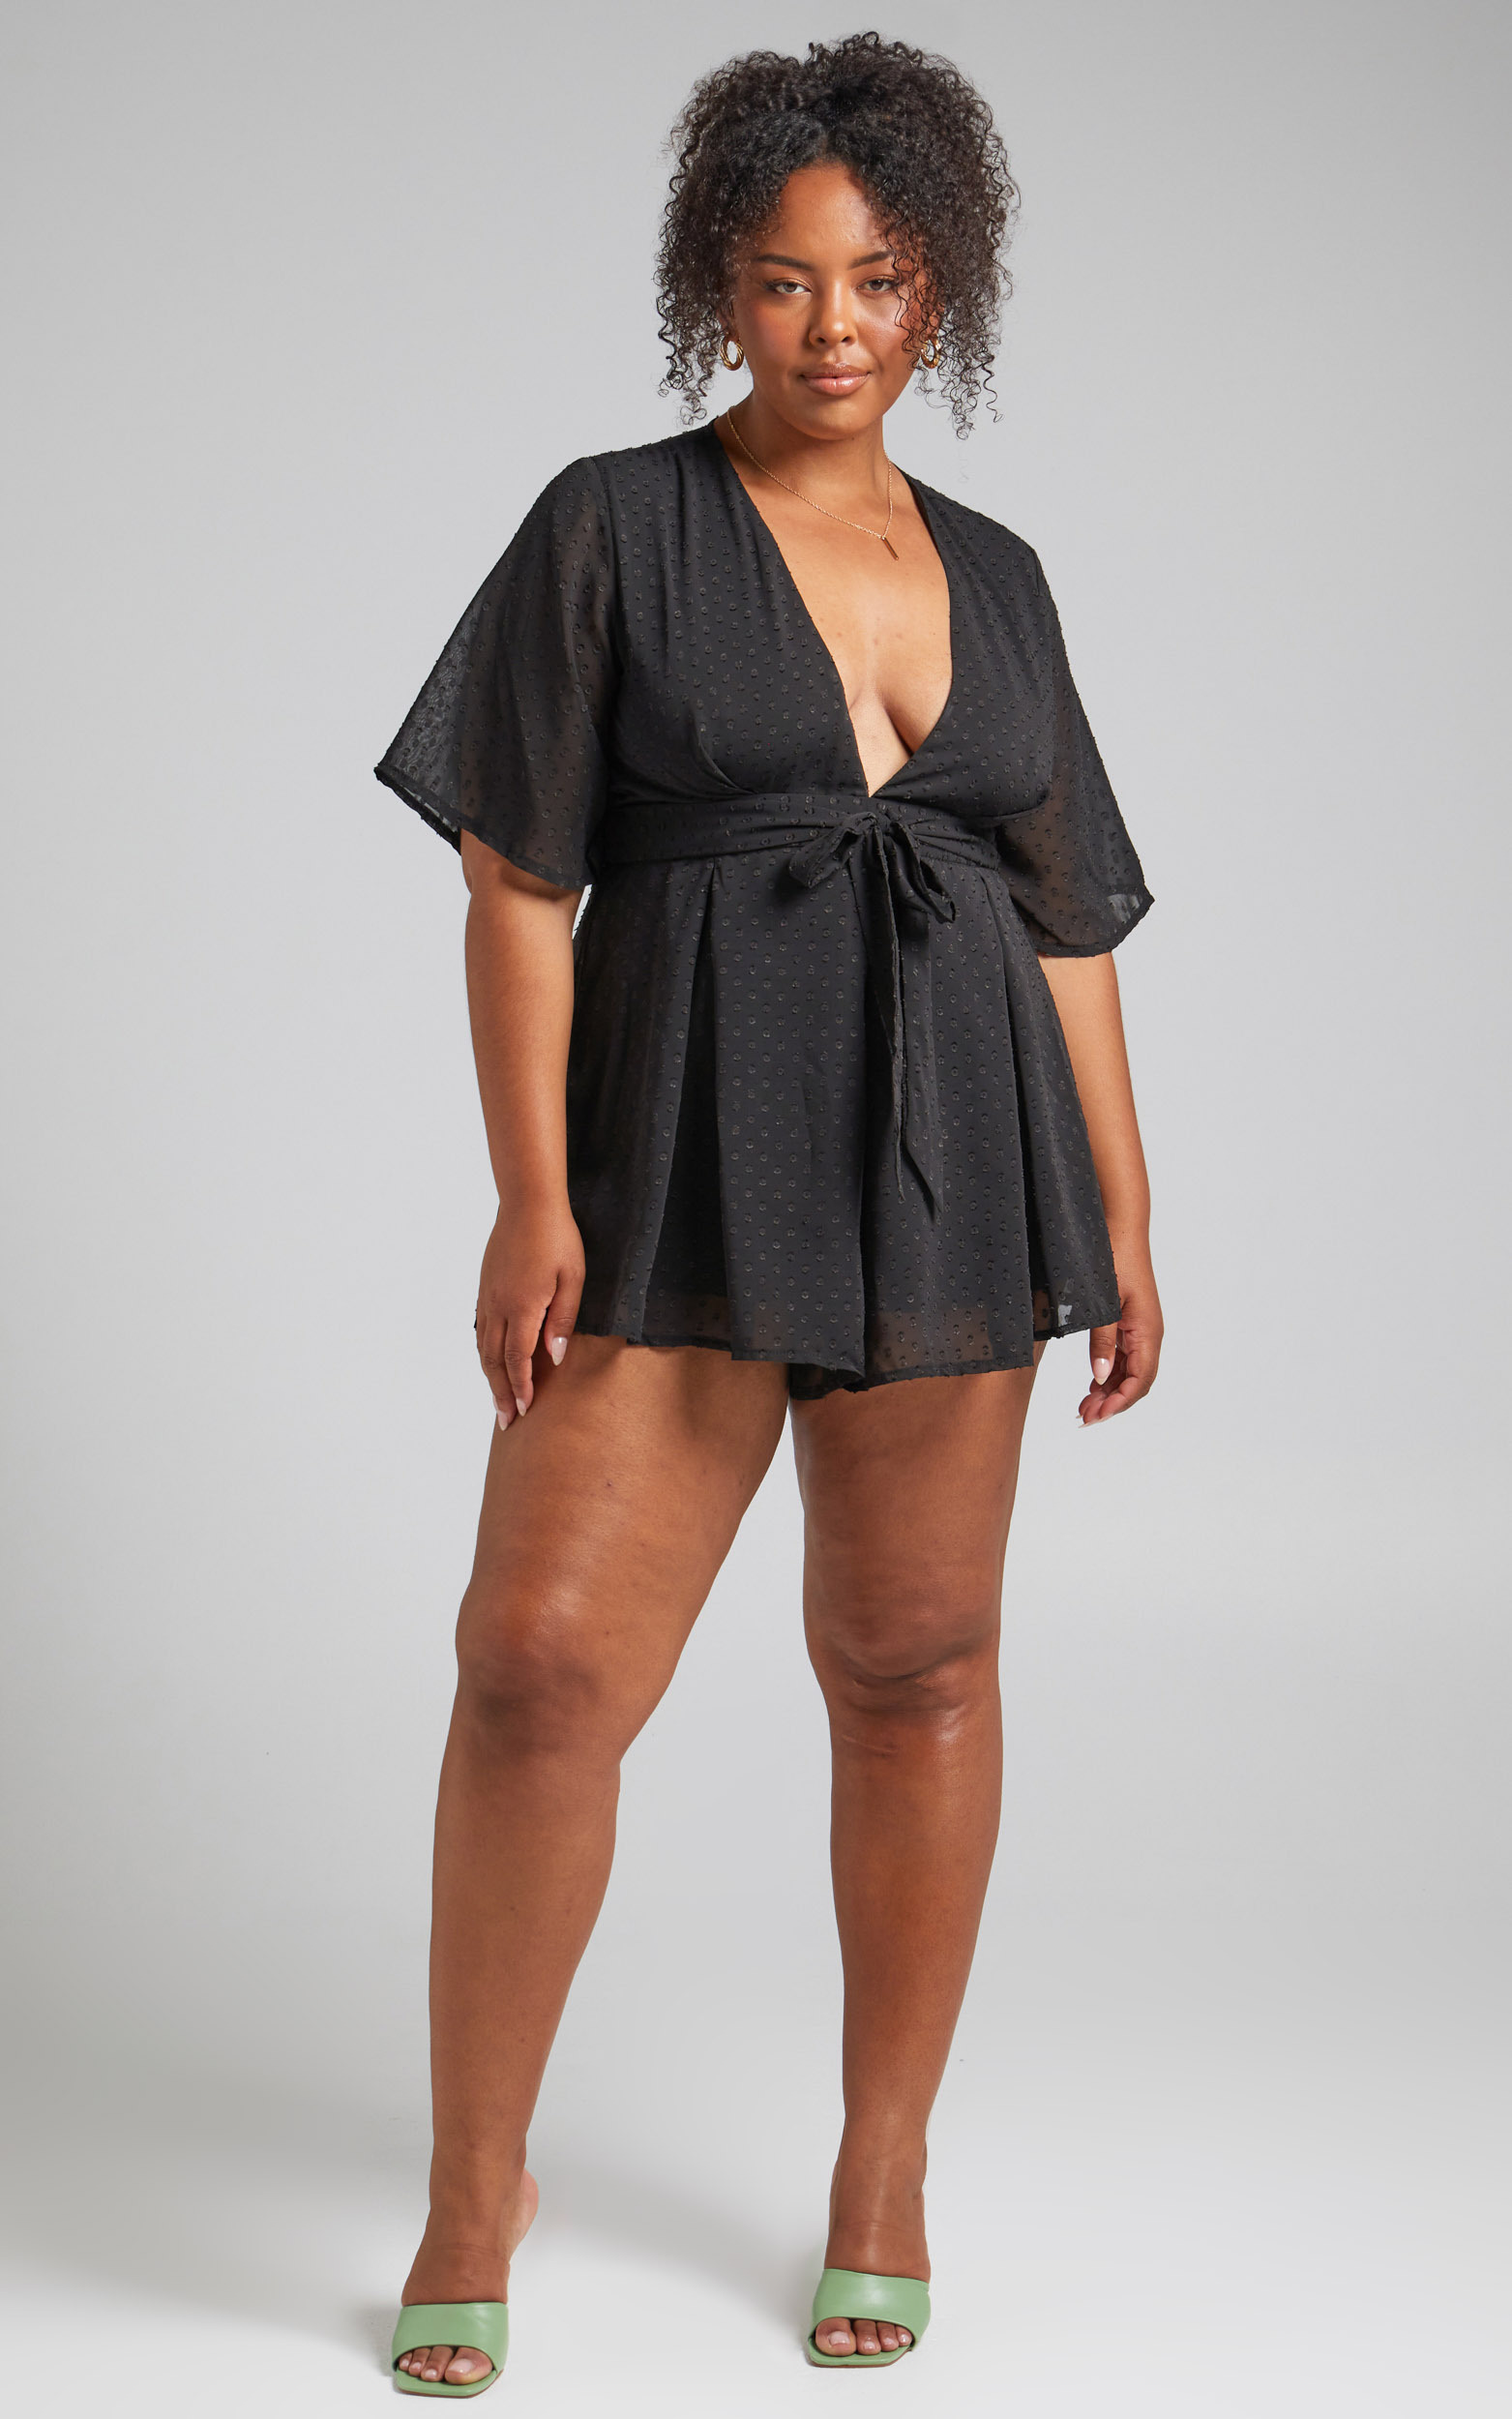 Chains Hit My Chest Plunge Mini Playsuit in Black - 06, BLK1, hi-res image number null